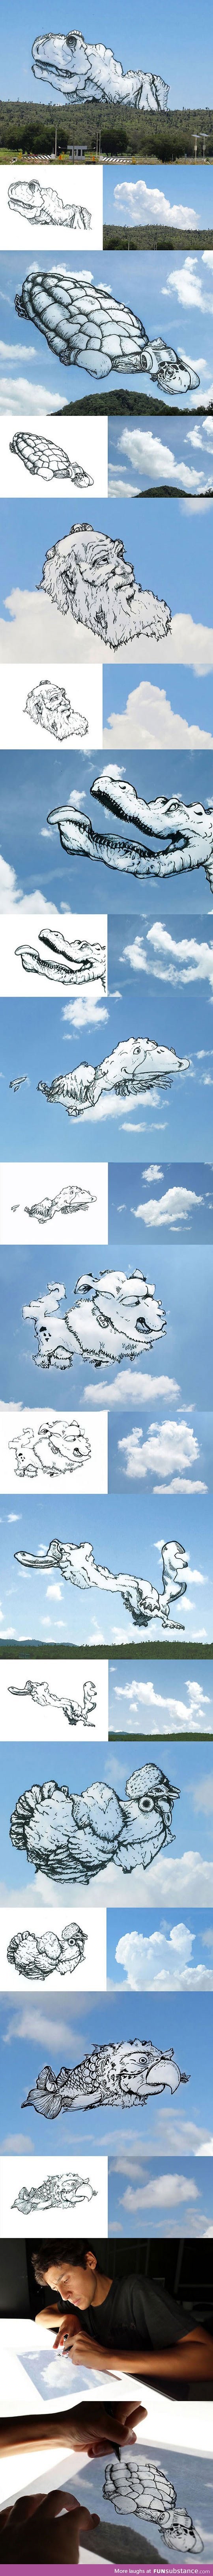 Clouds drawn into illustrations